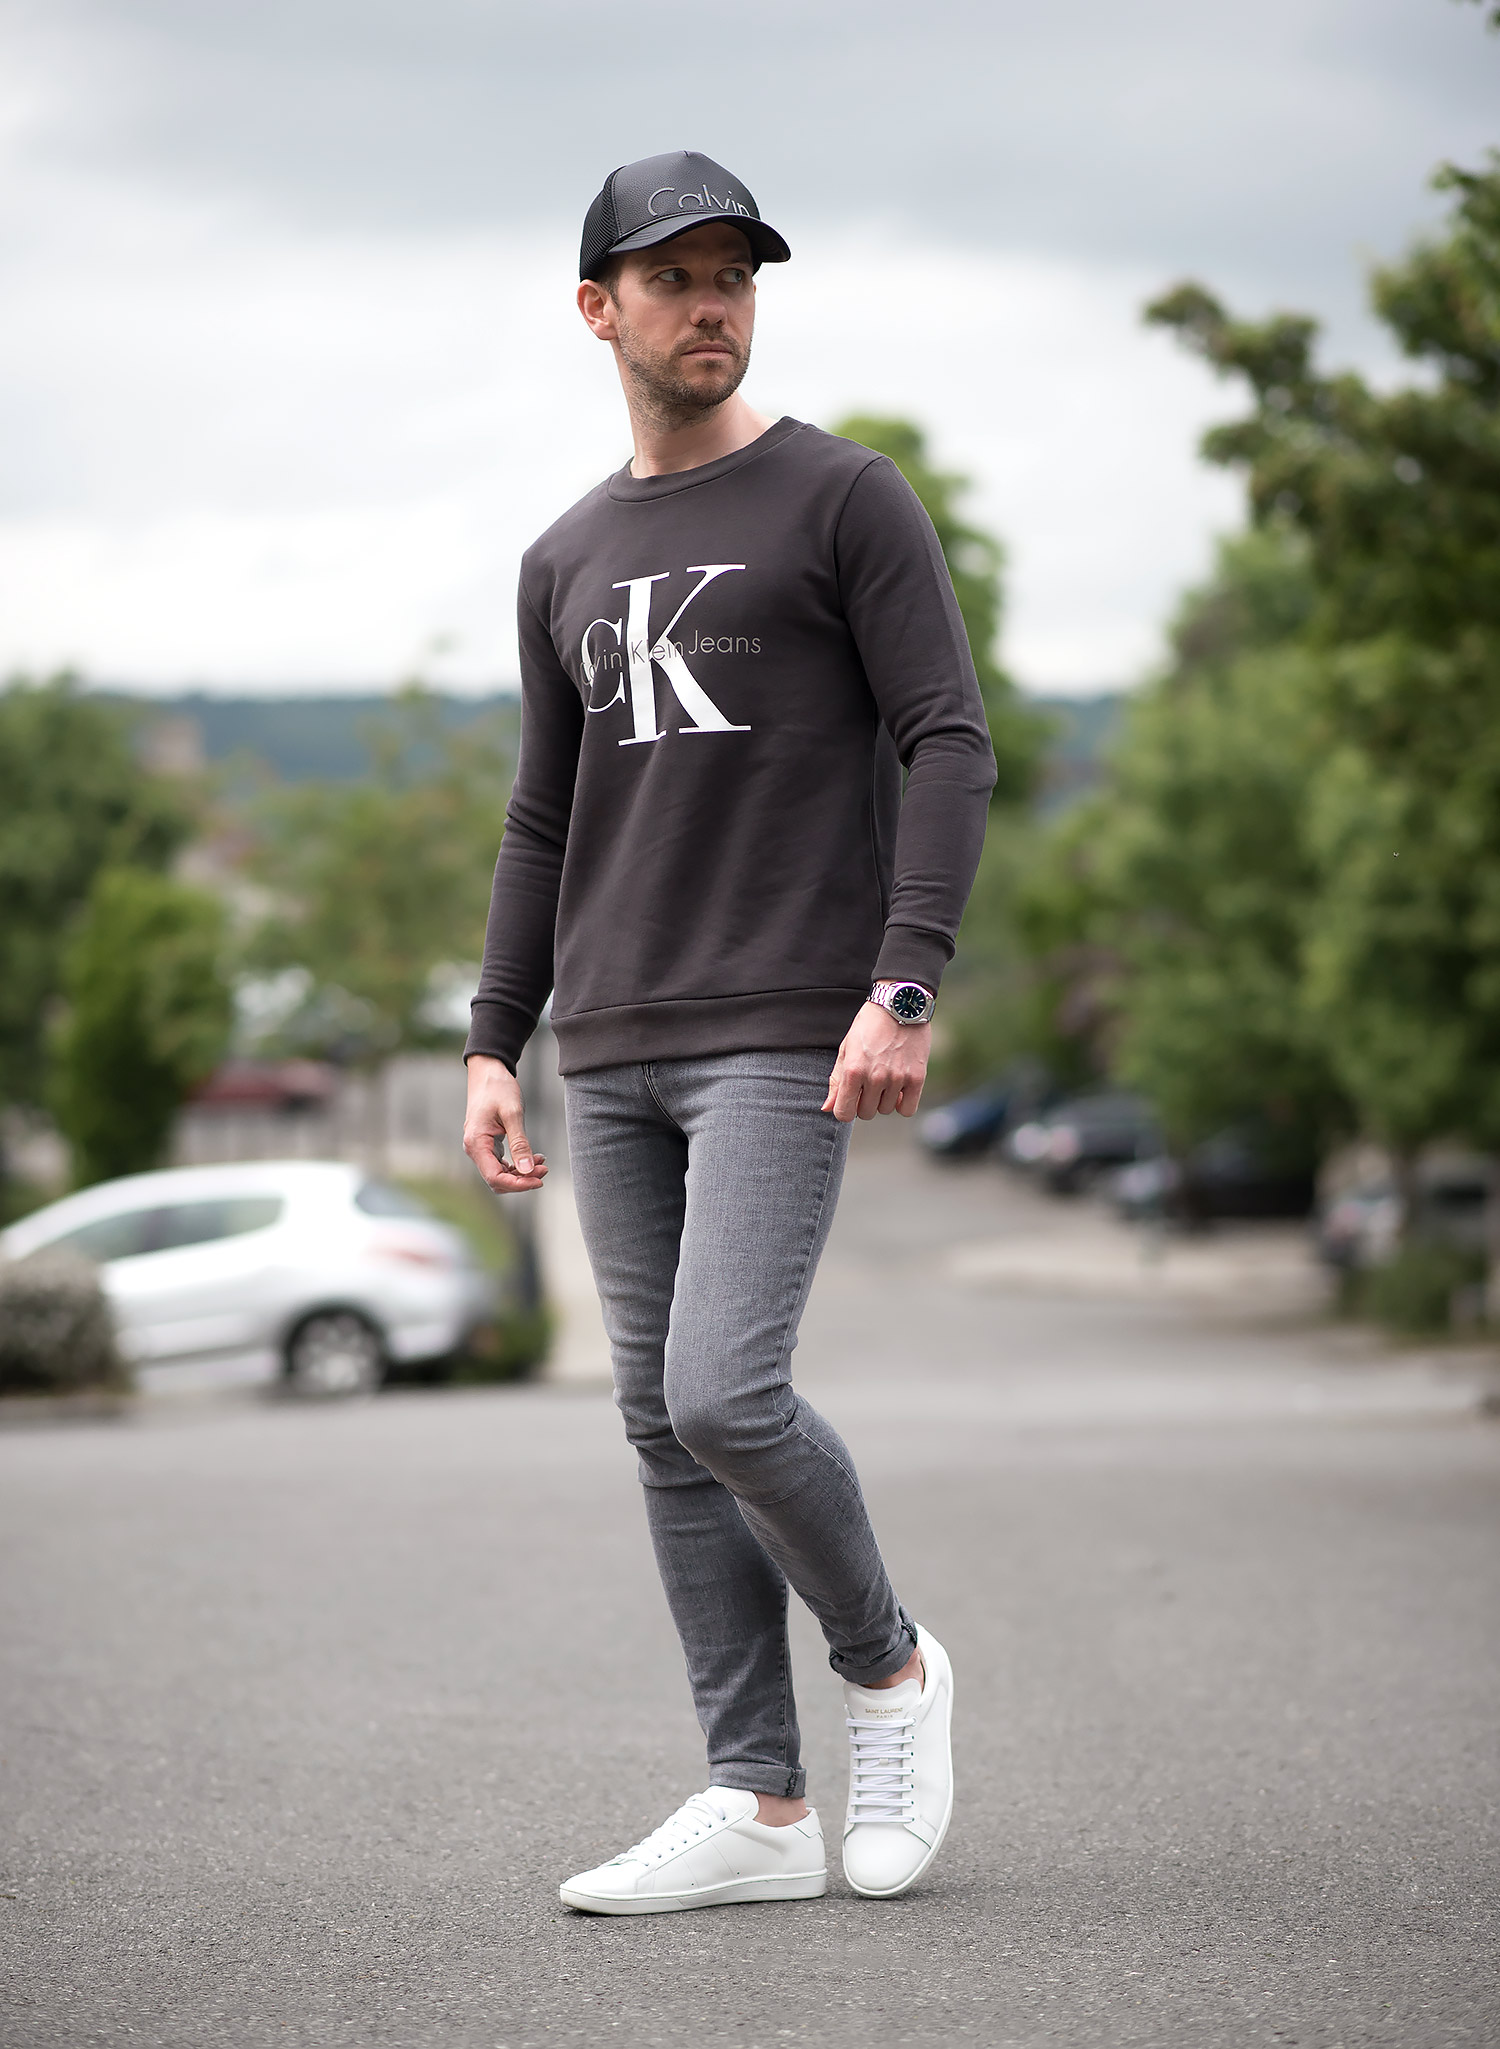 Calvin Klein Sweatshirt And J Brand Grey Skinny Jeans Outfit | Your